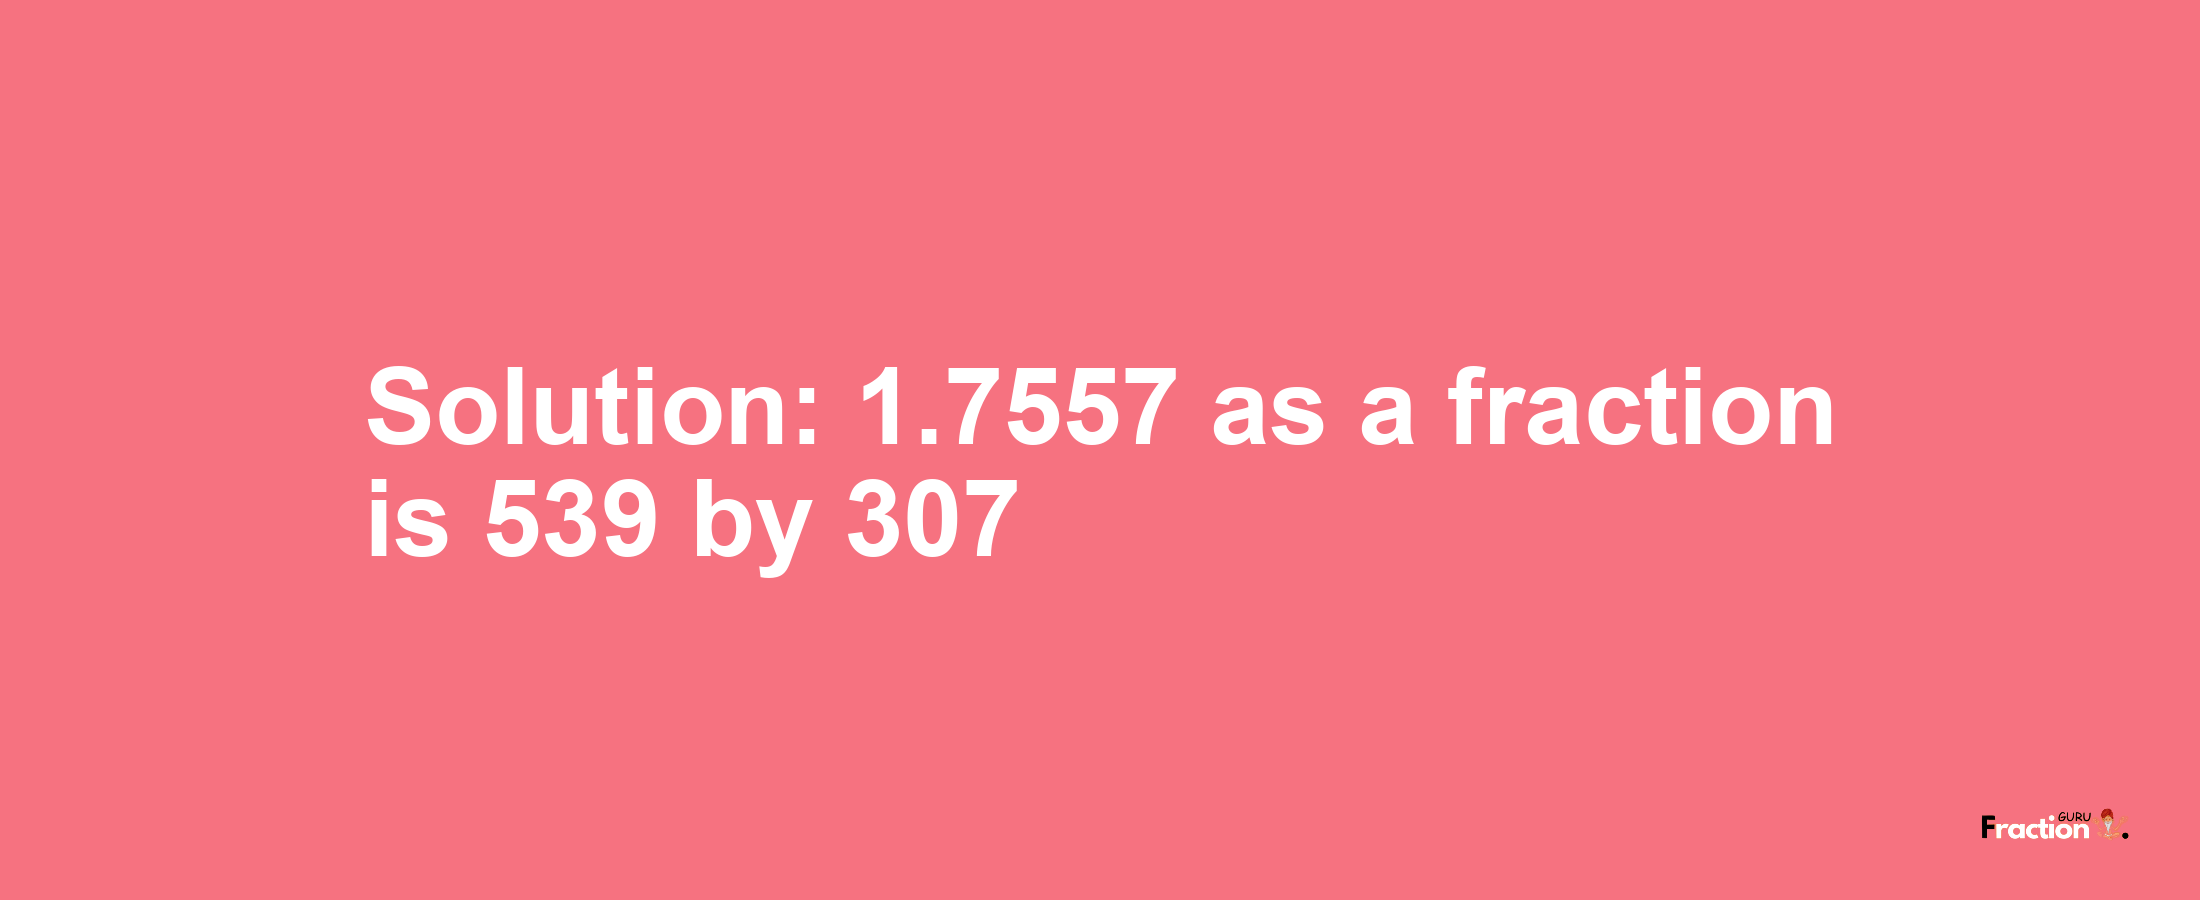 Solution:1.7557 as a fraction is 539/307